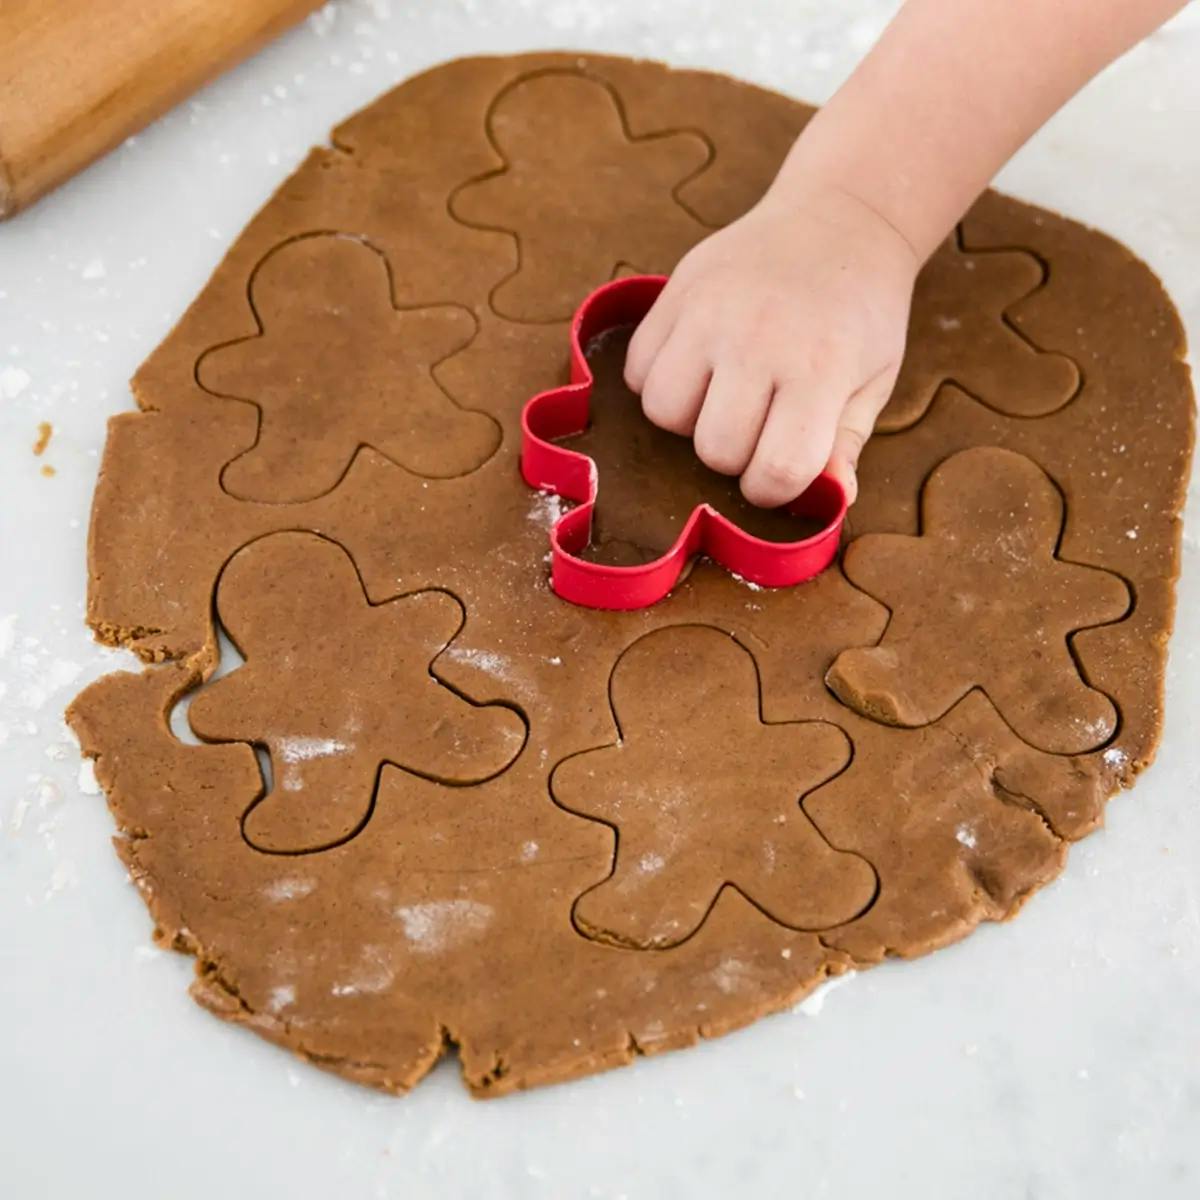 Cutting Gingerbread Men out of gingerbread cookie dough.